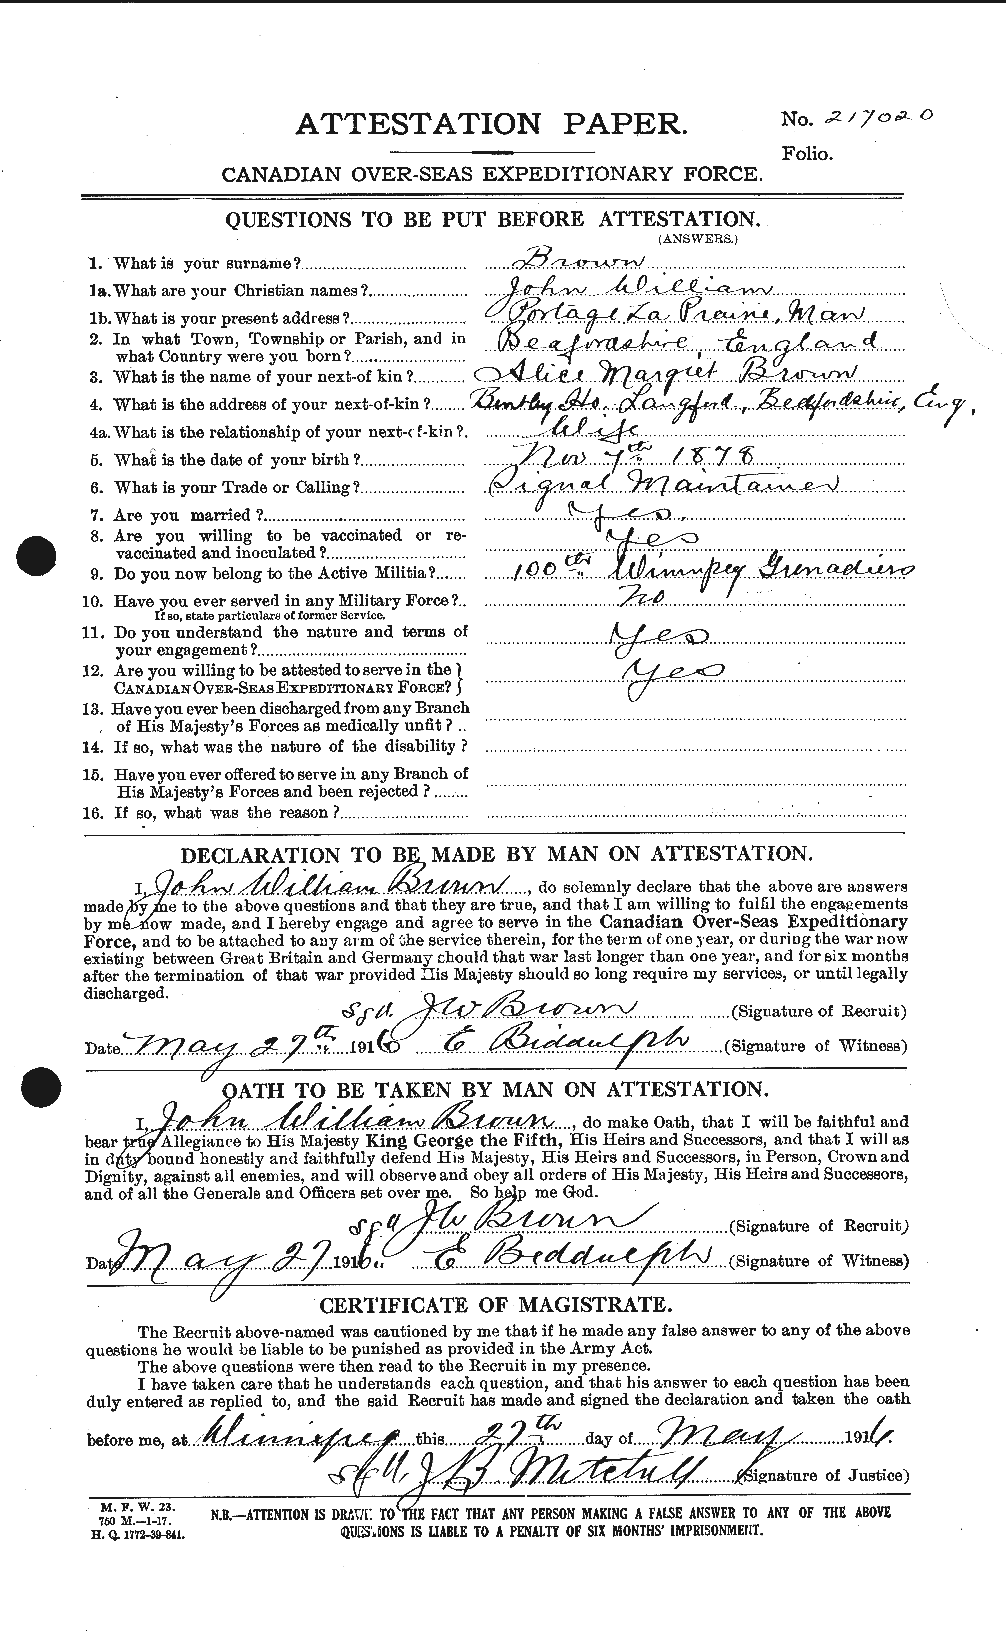 Personnel Records of the First World War - CEF 265900a